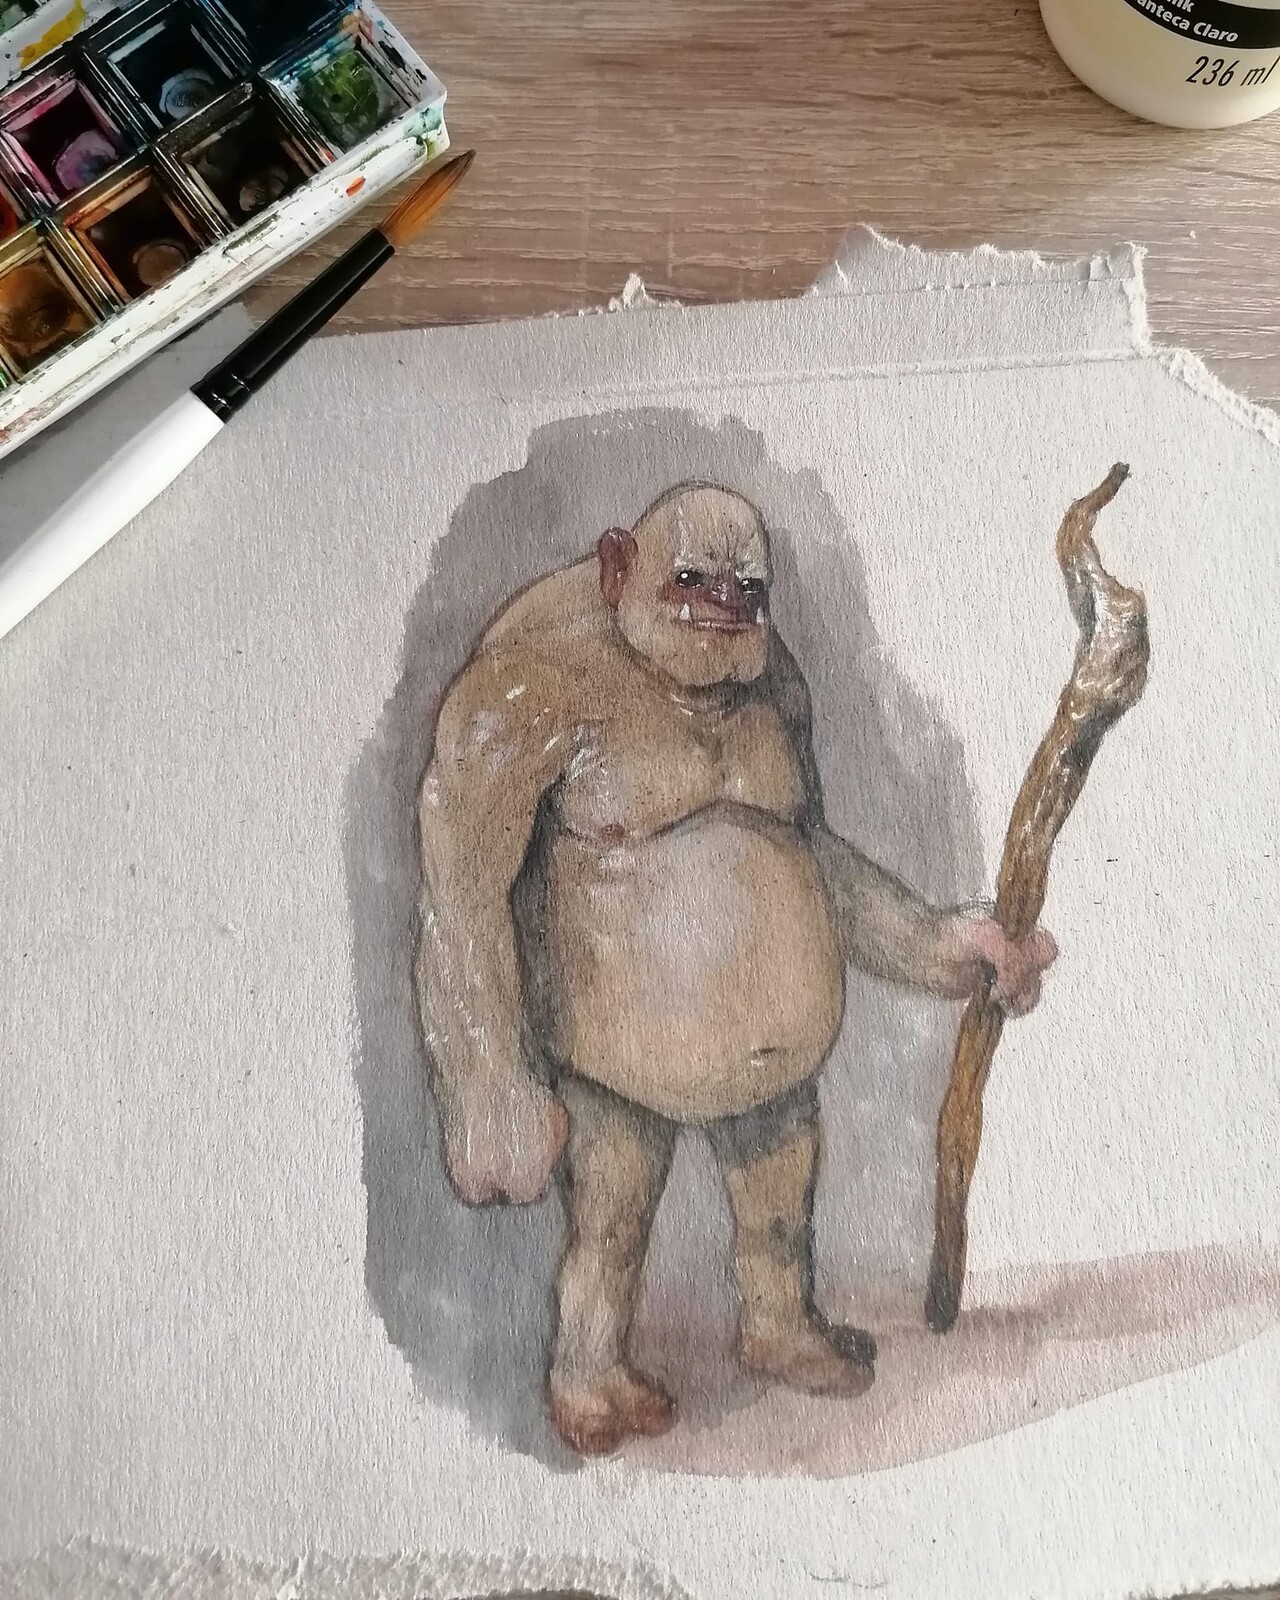 Quick ogre study made in watercolours and pencil